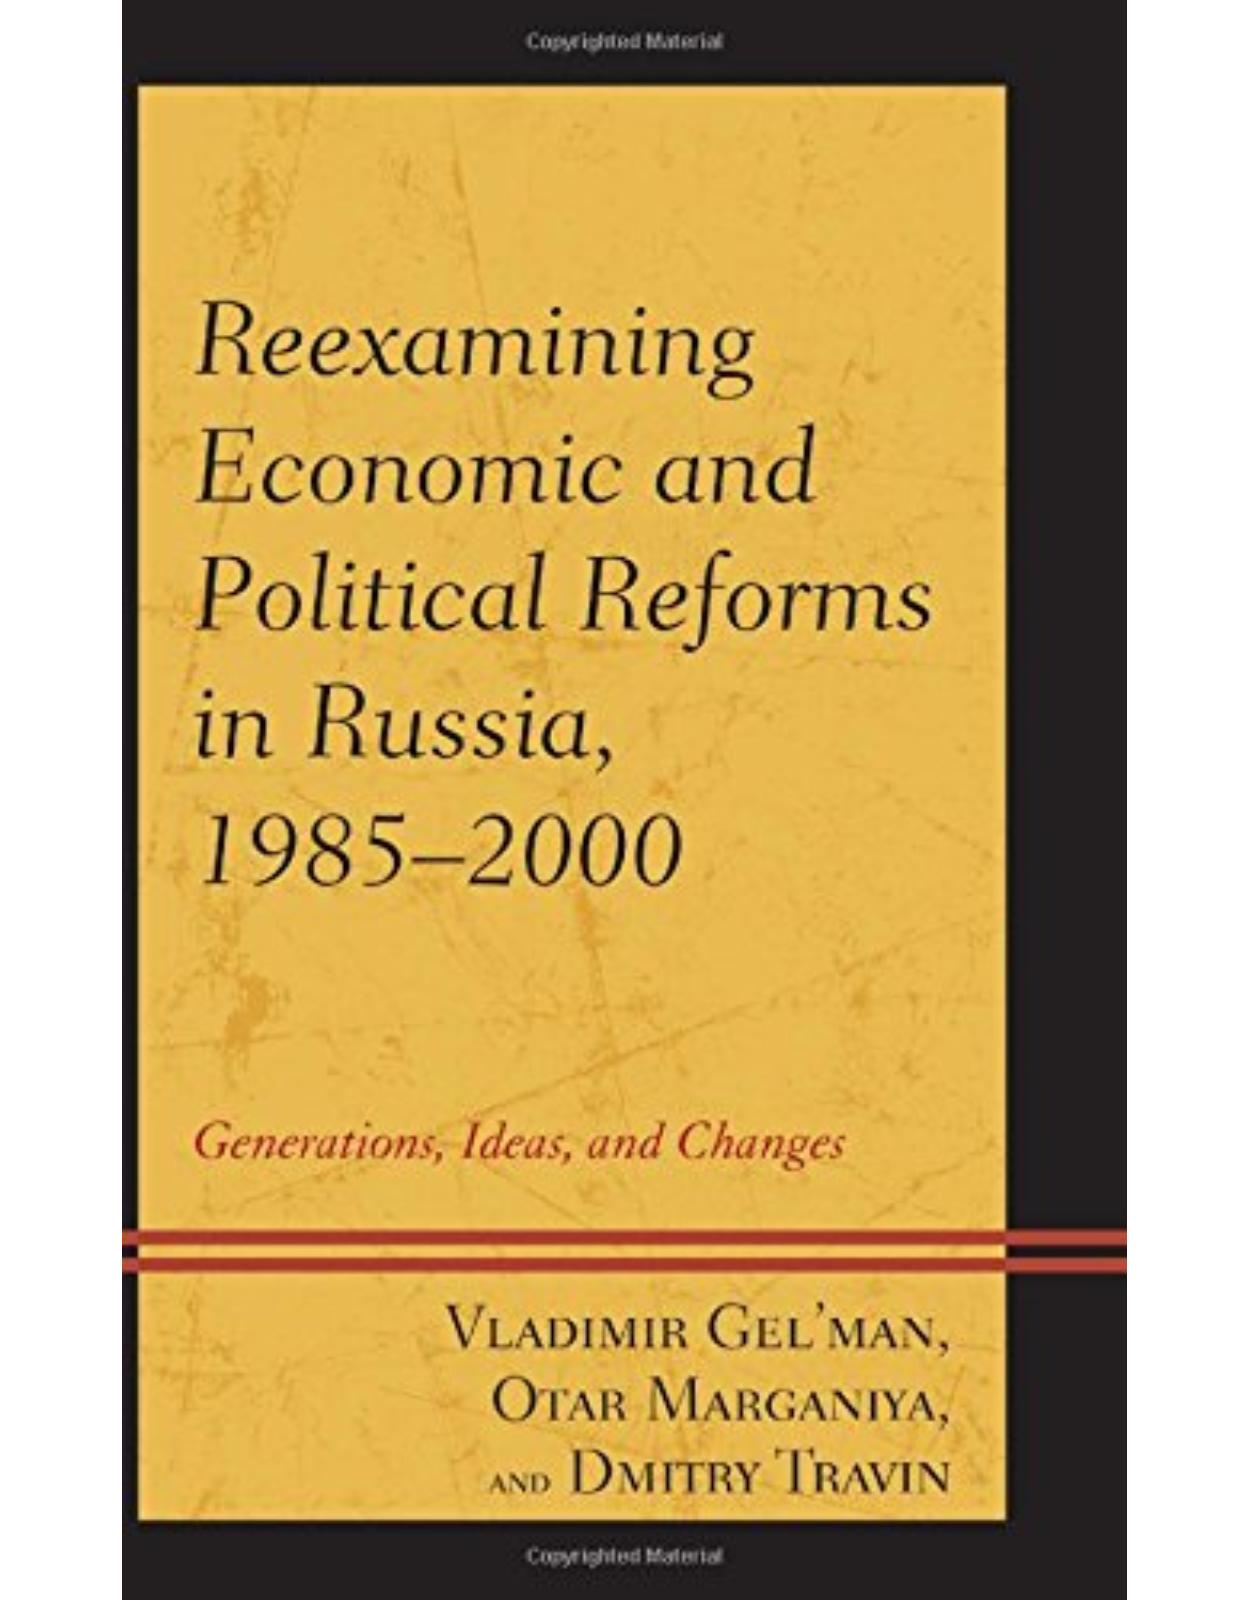 Reexamining Economic and Political Reforms in Russia, 1985�2000: Generations, Ideas, and Changes